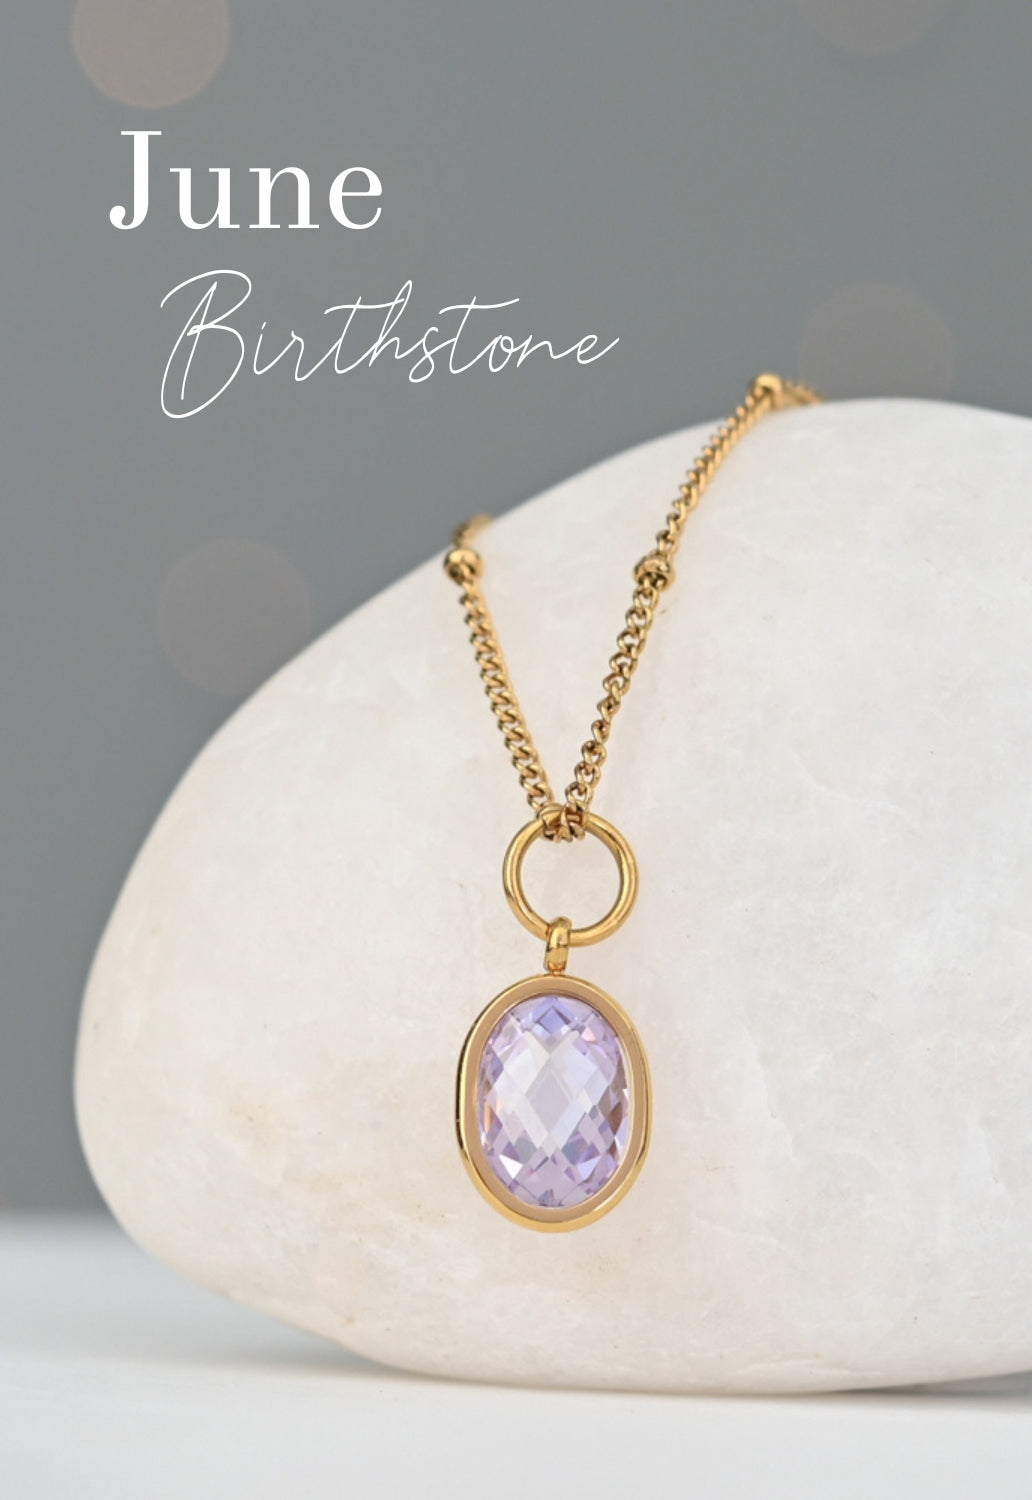 Birthstone Necklace - Four Charms